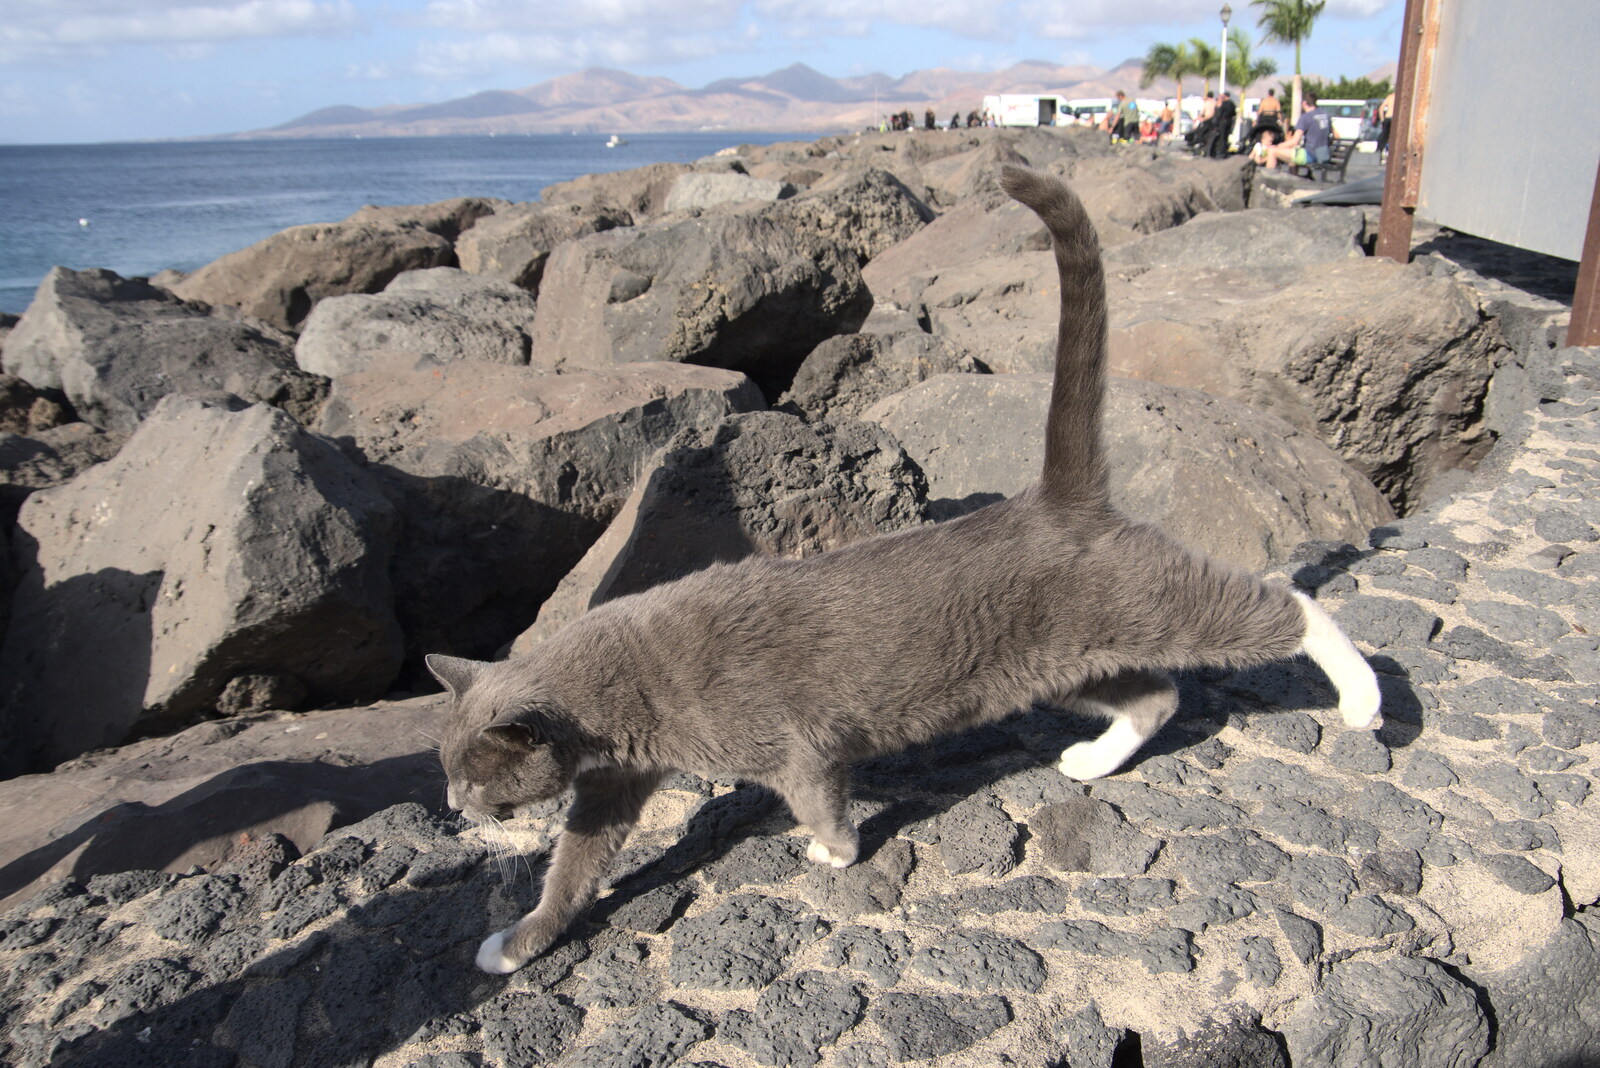 The resident grey cat at Playa Chica from Five Days in Lanzarote, Canary Islands, Spain - 24th October 2021